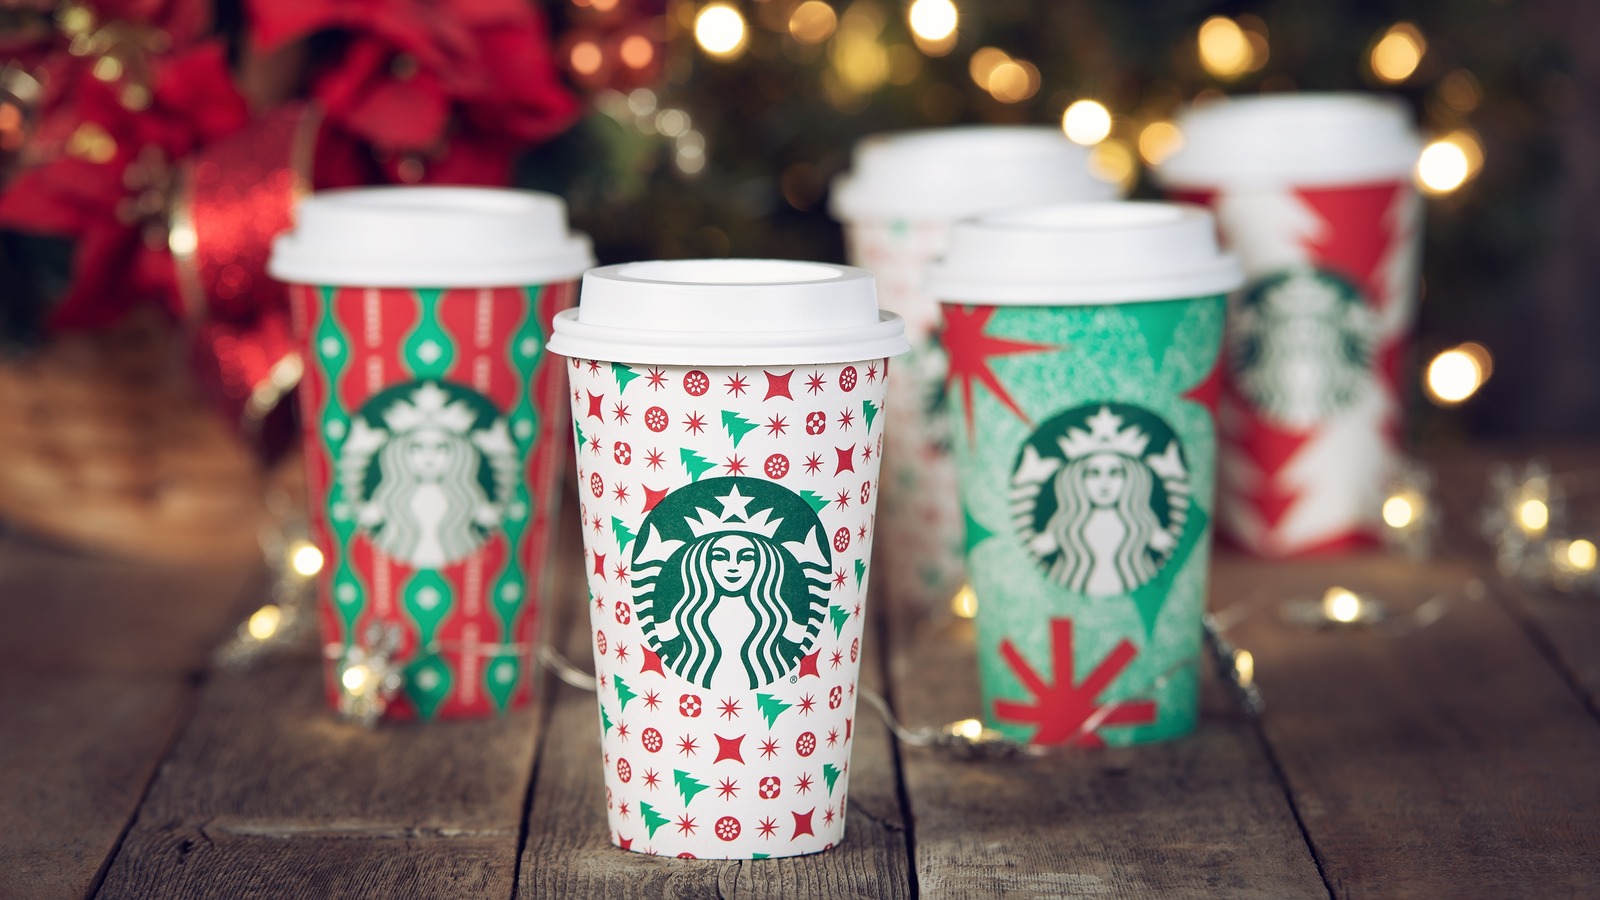 https://www.mashed.com/img/gallery/every-2021-starbucks-holiday-item-ranked-worst-to-best/l-intro-1670954991.jpg